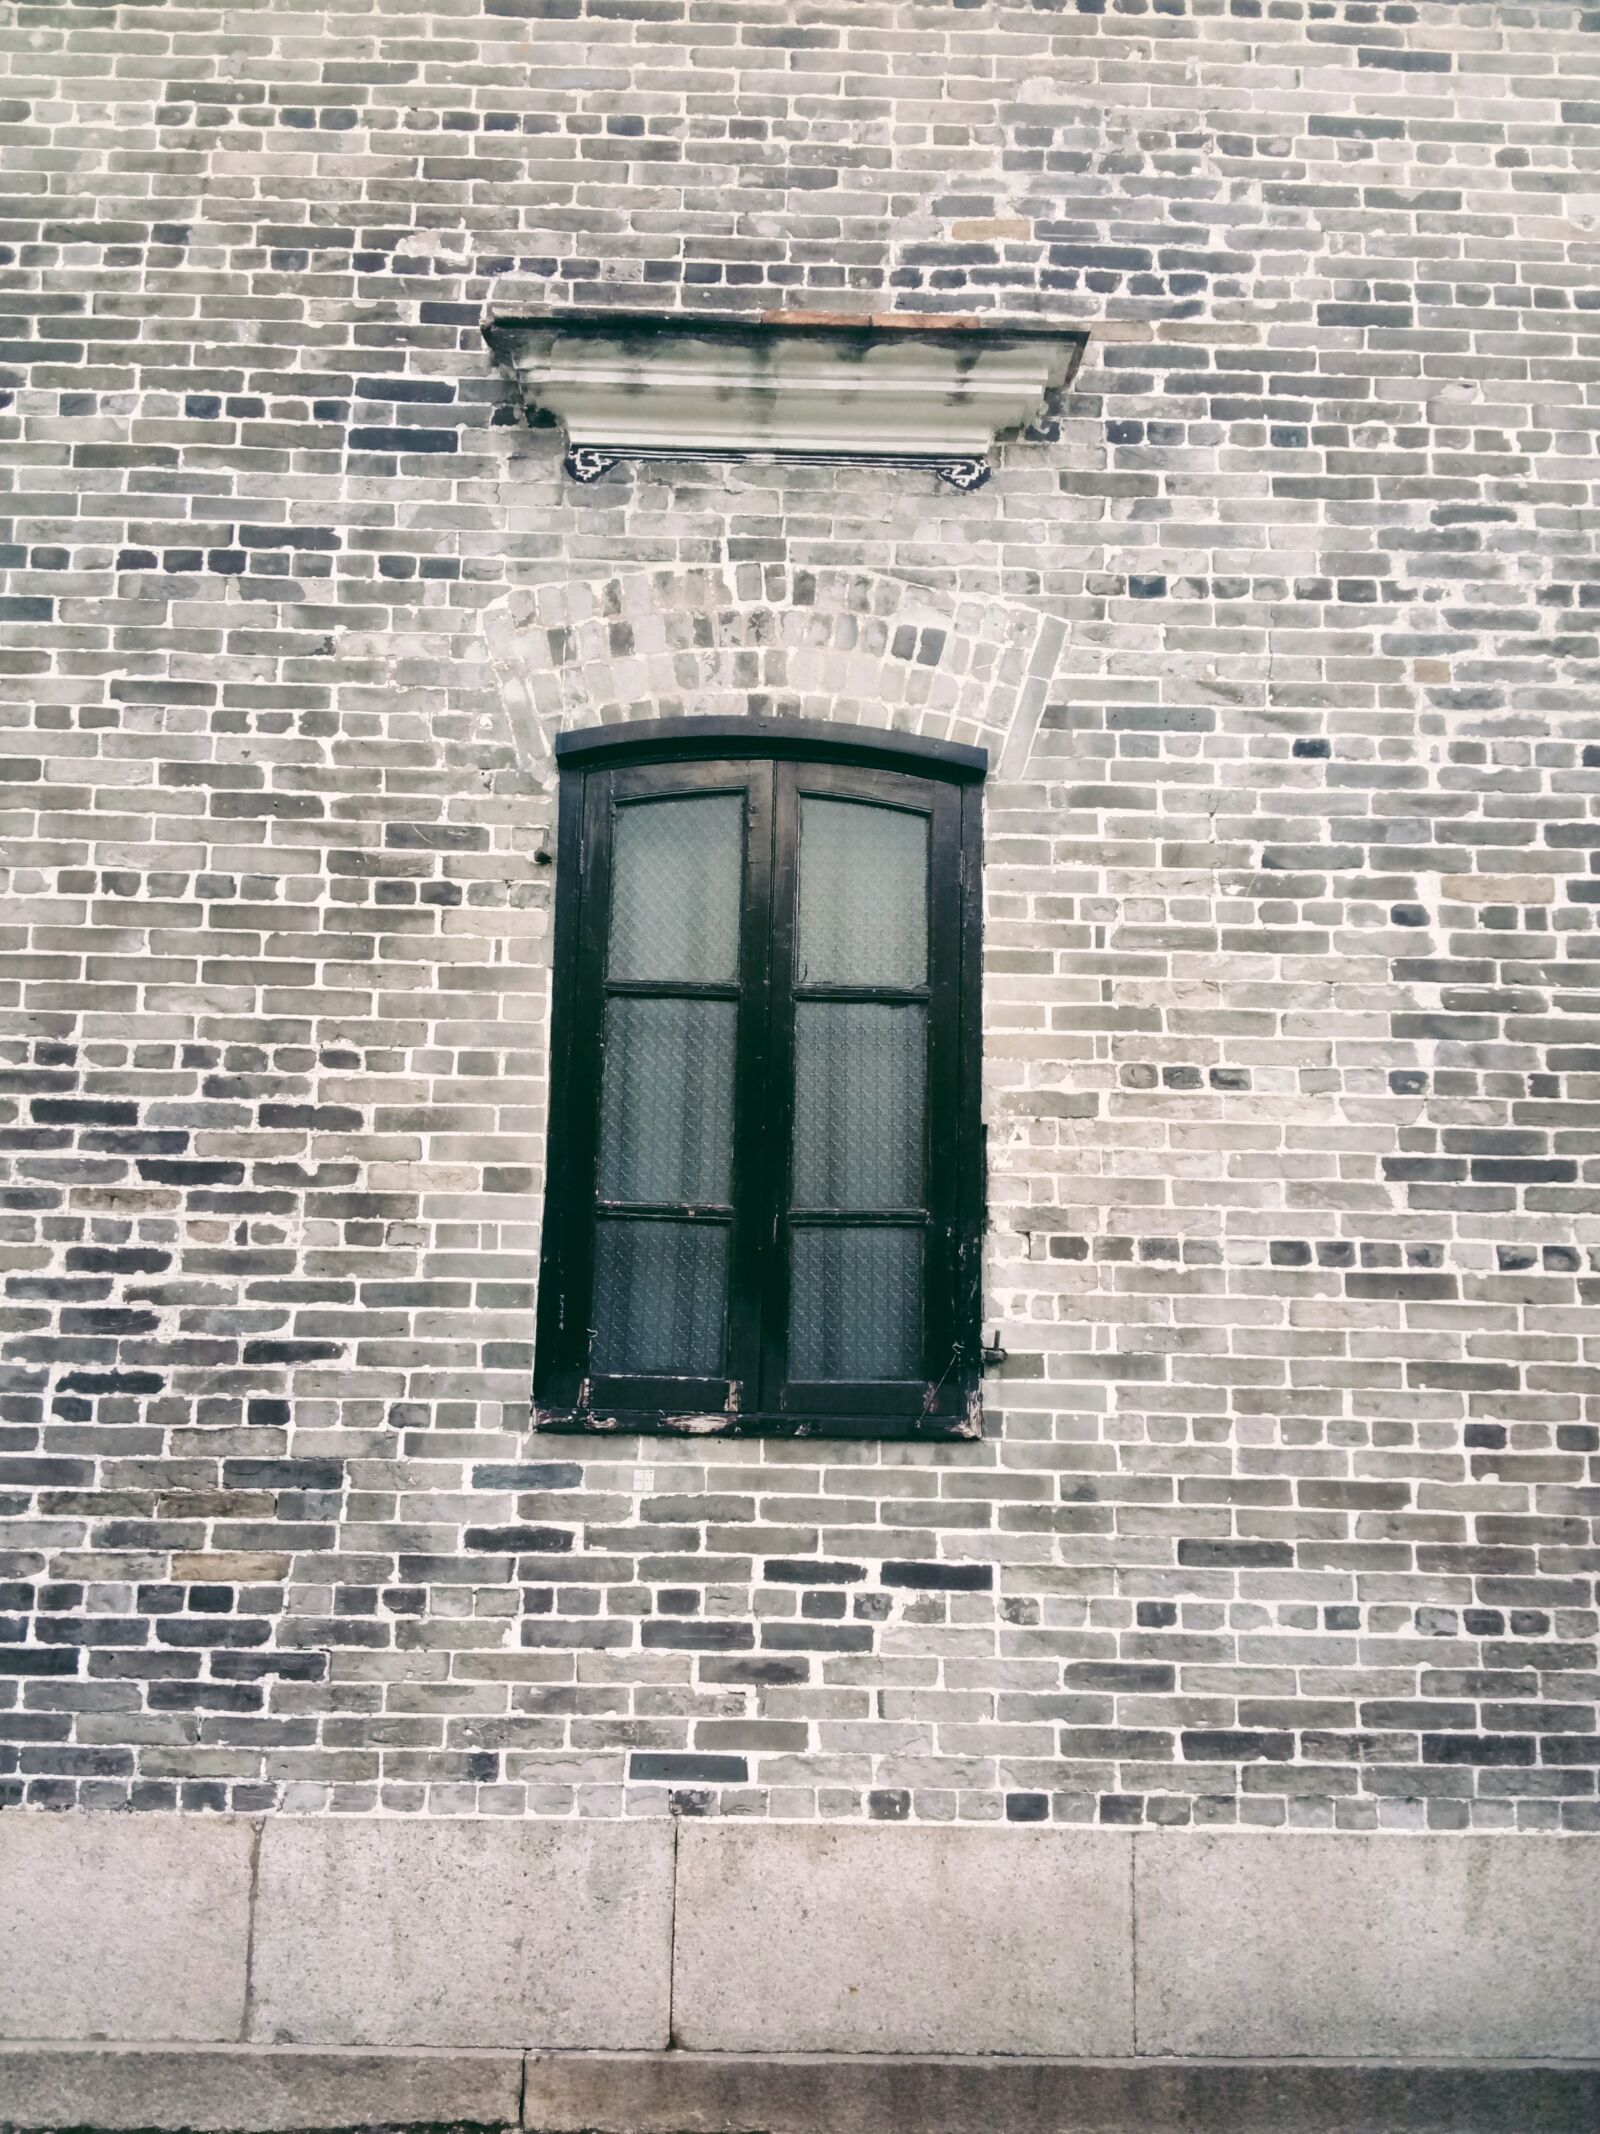 Meizu m3 note sample photo. Windows, wall, old buildings photography